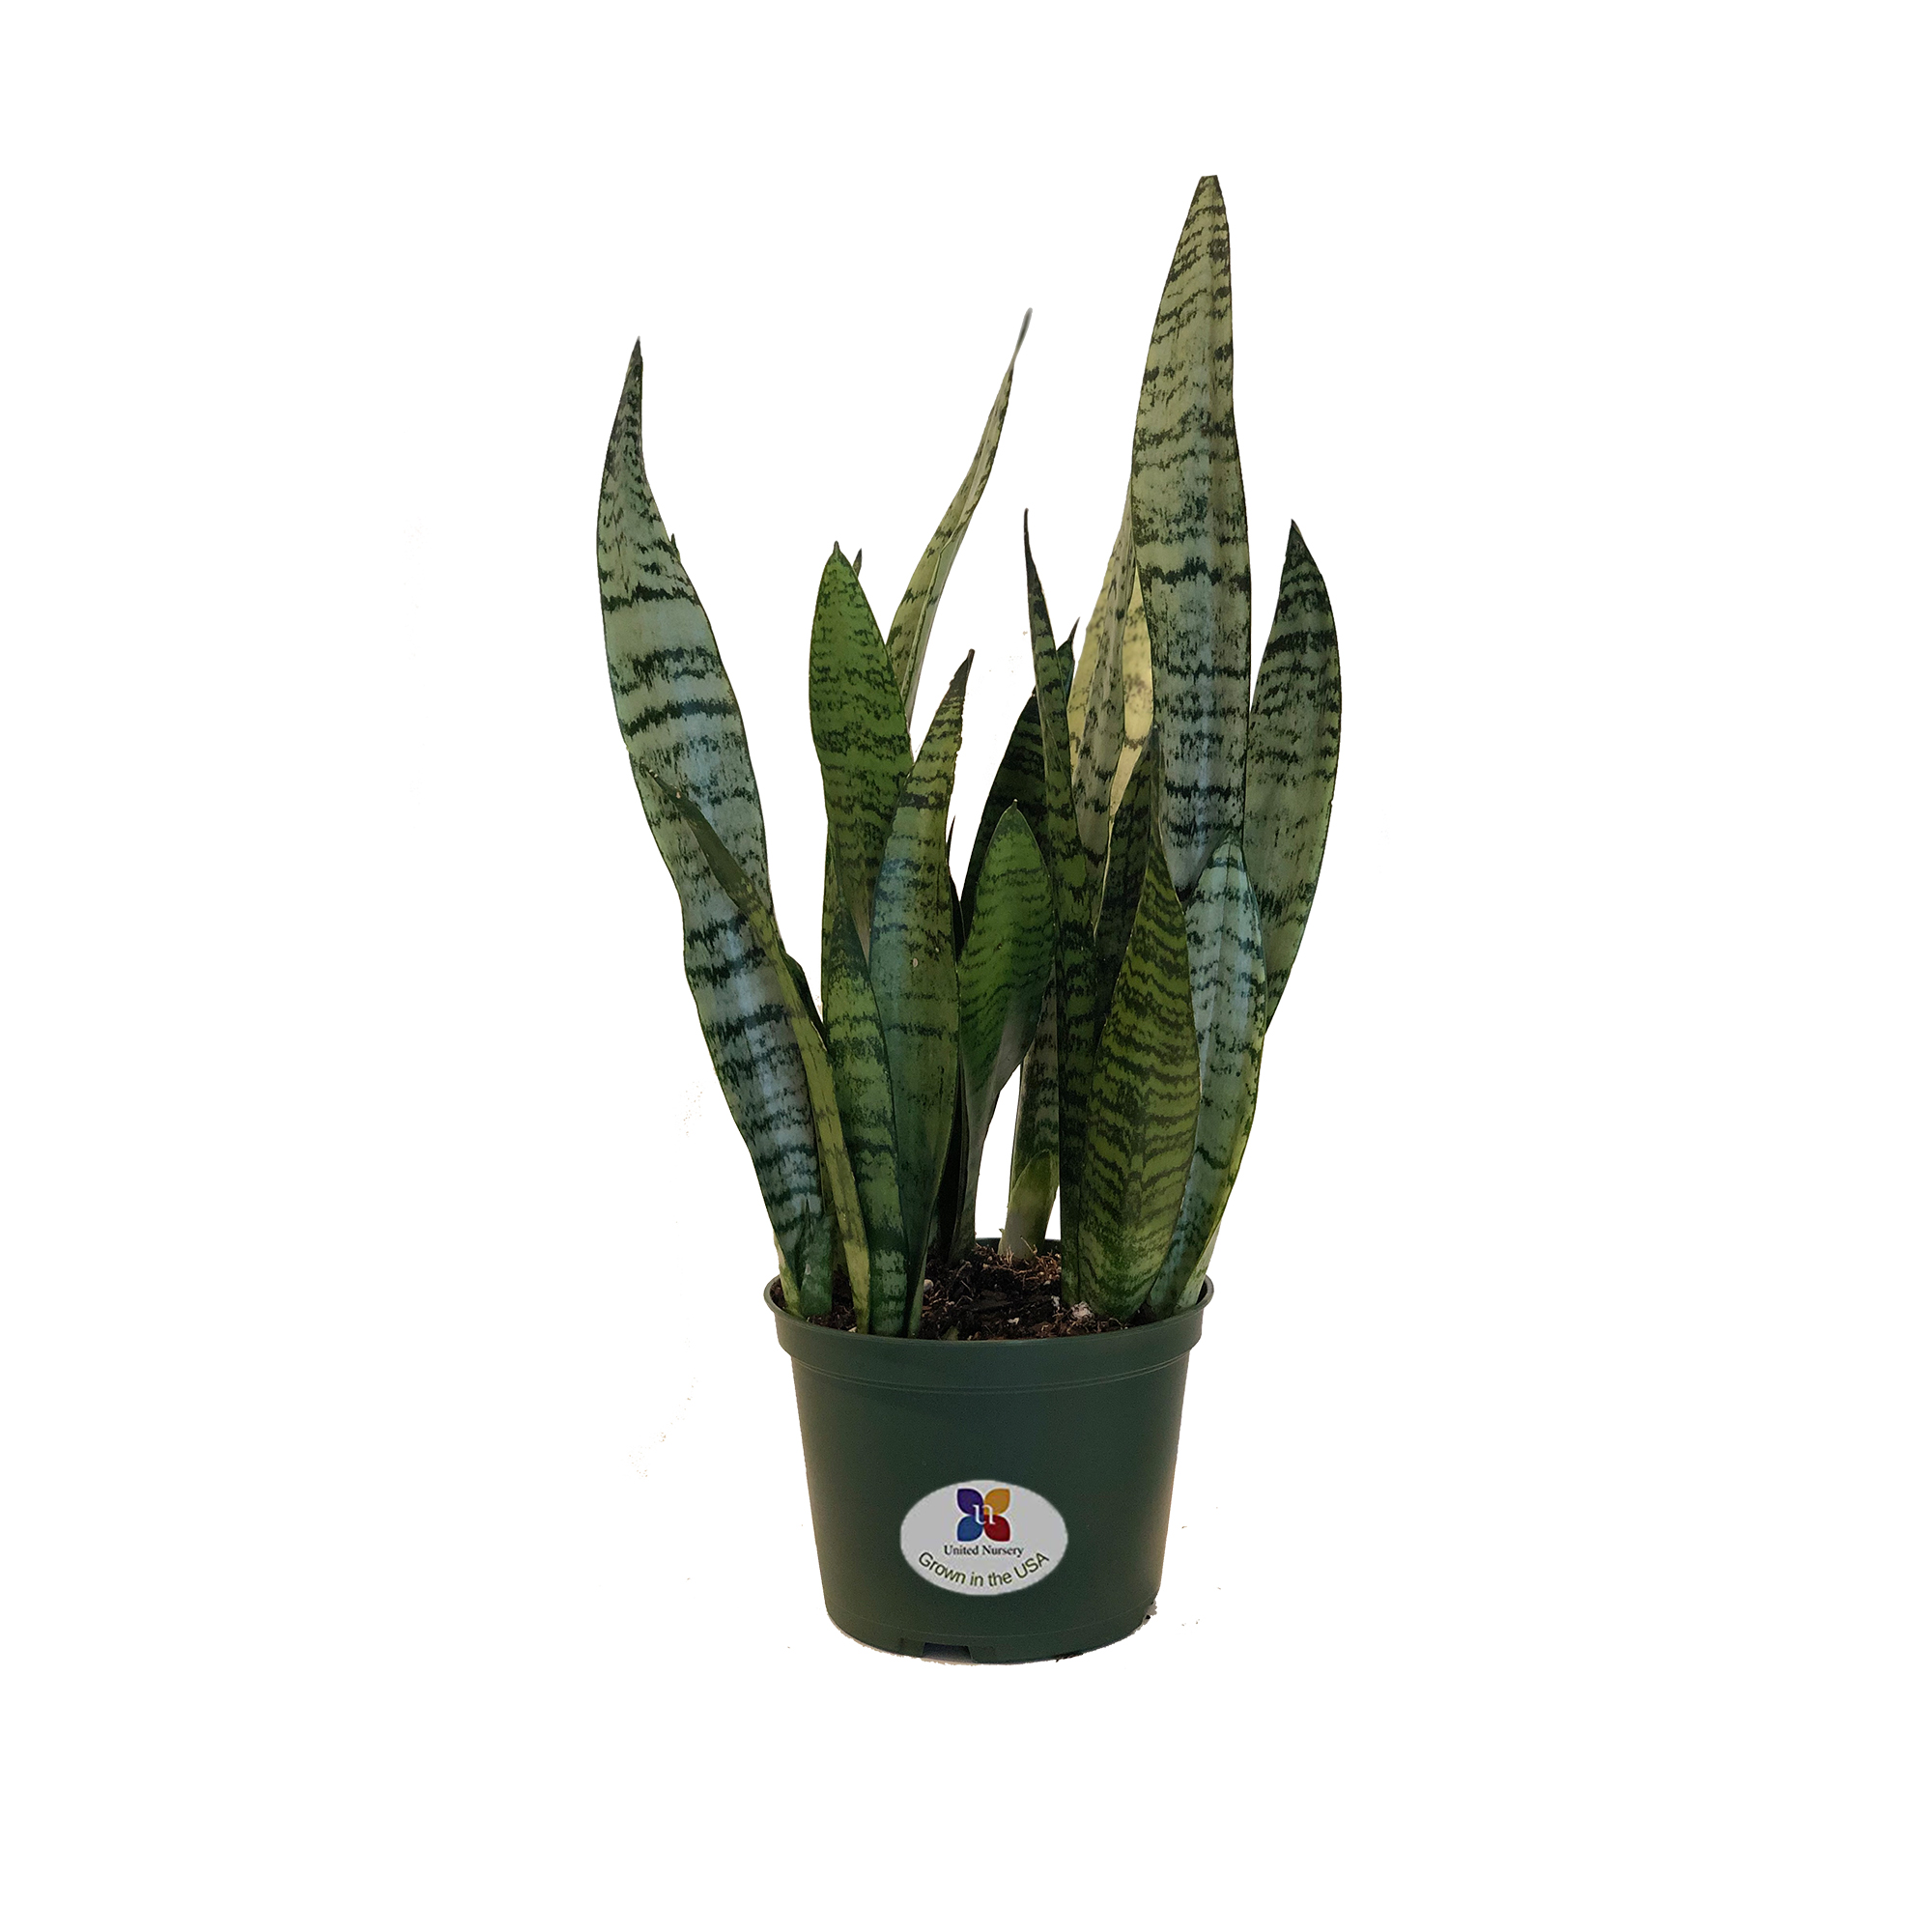 United Nursery Sansevieria Zeylanica Live Indoor Snake Plant Shipped in 6 inch Grower Pot 18-22 inch Shipping Size - image 1 of 3